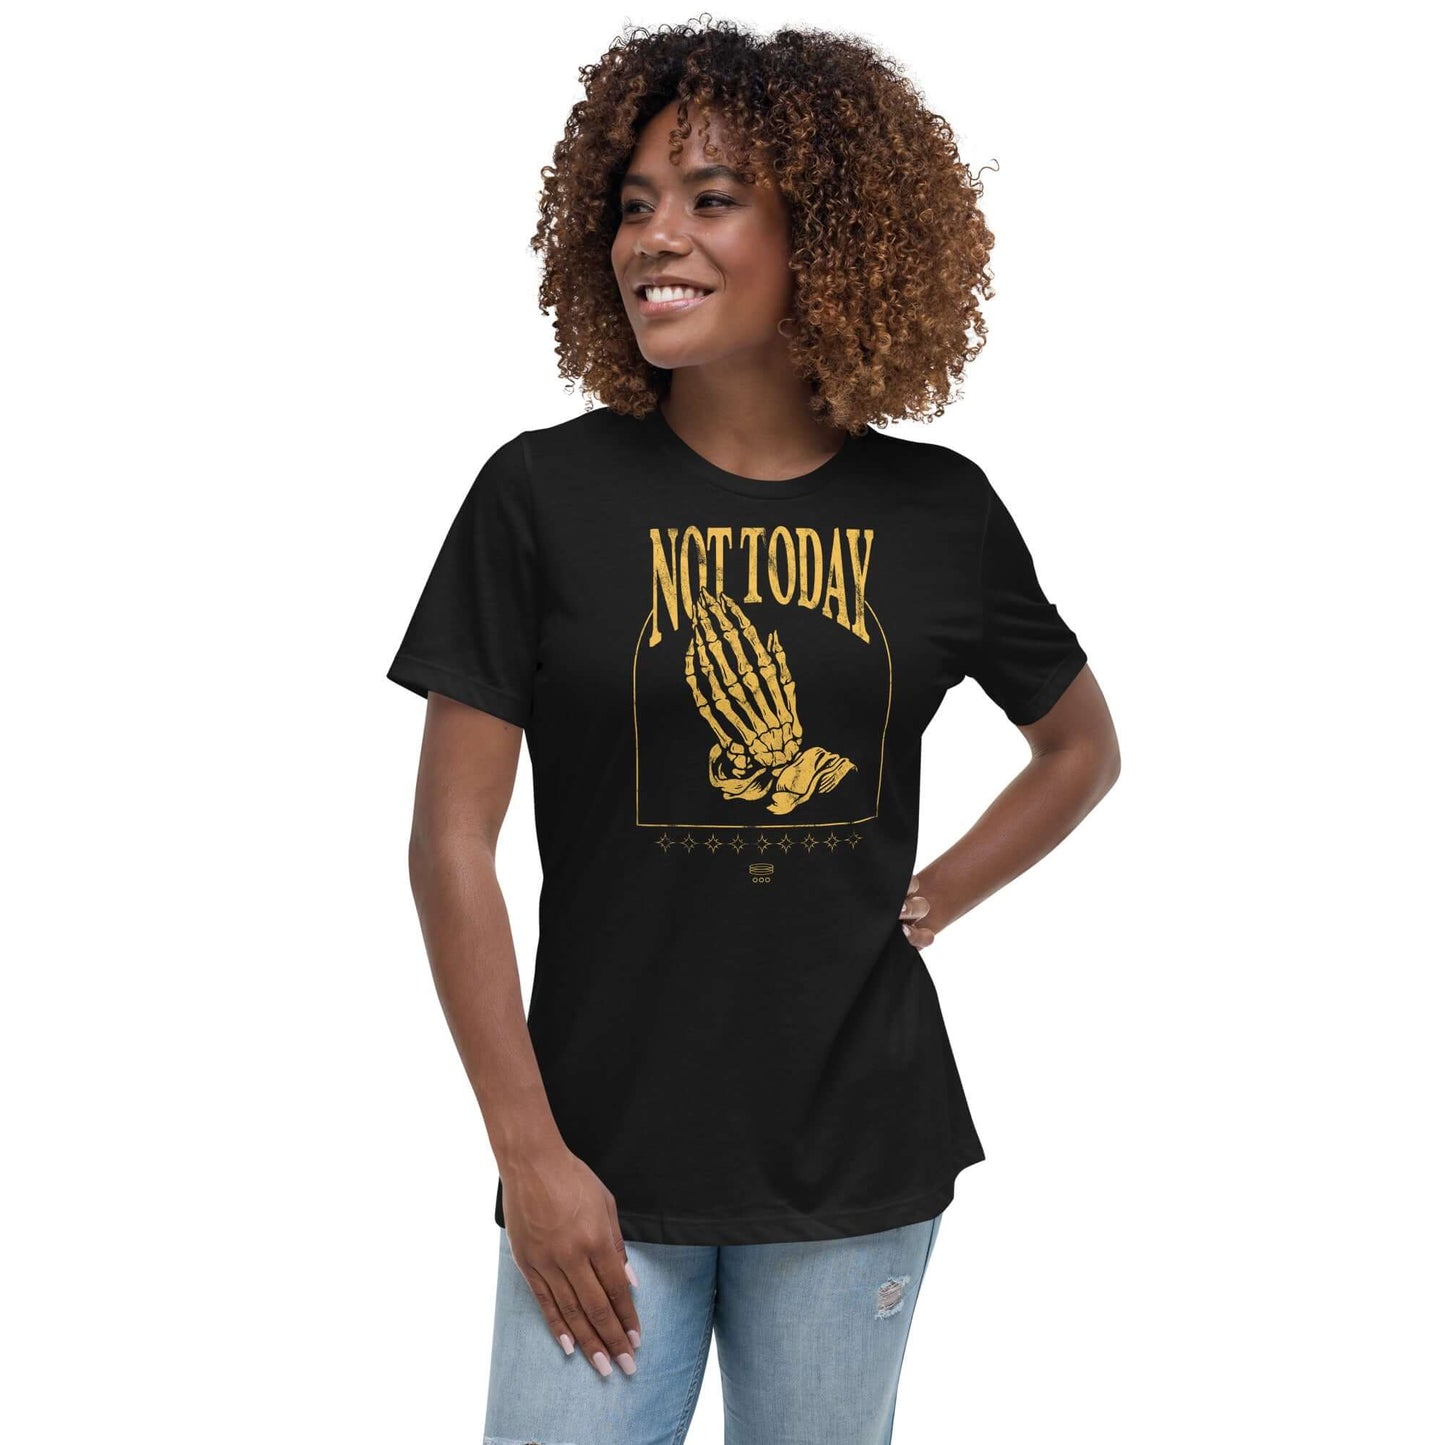 Not Today - Women's Relaxed T-Shirt Black